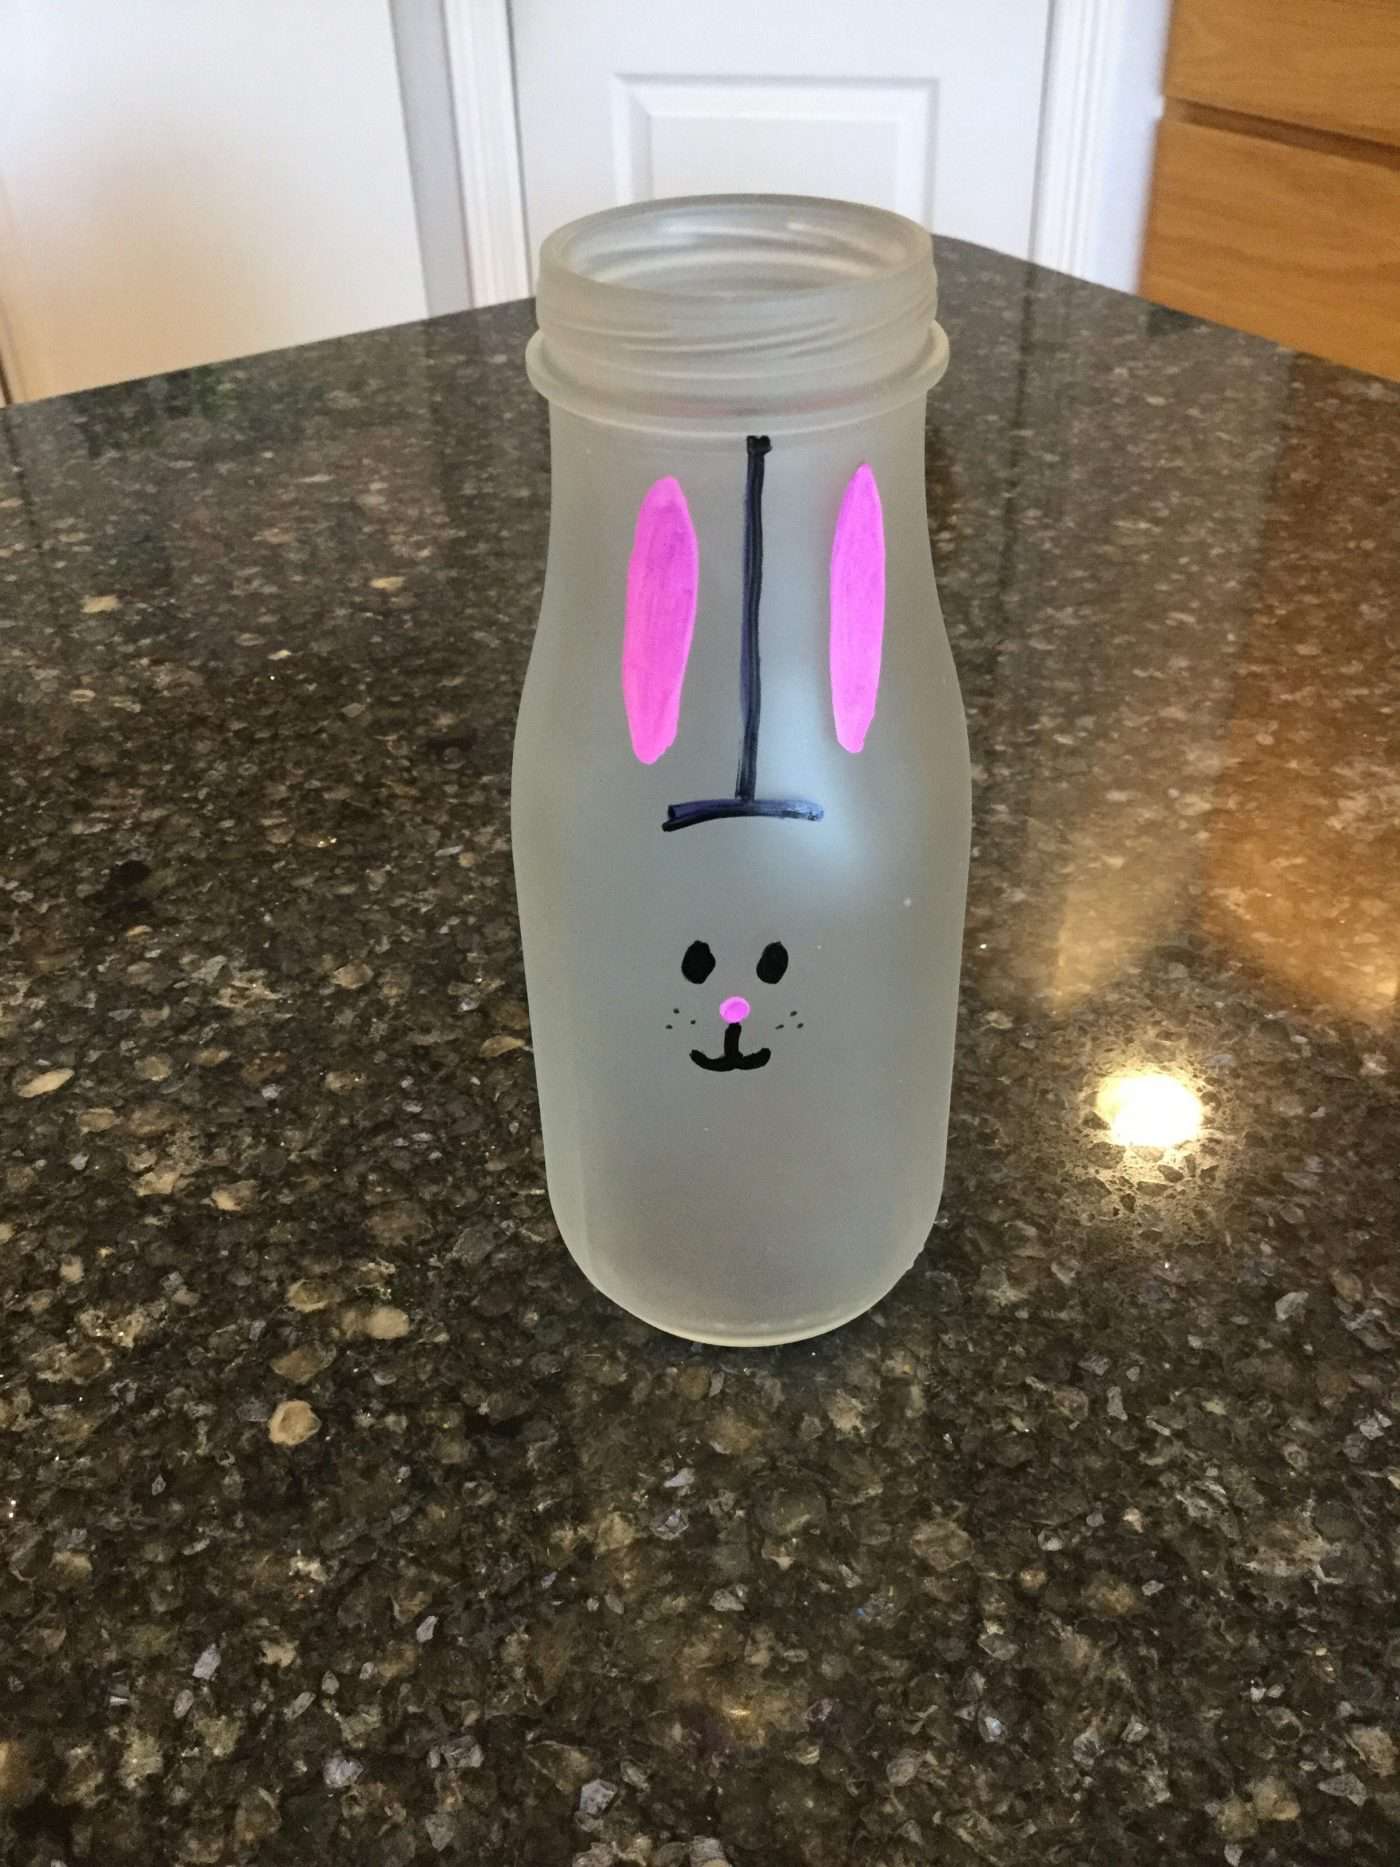 I used my Sharpie to draw on a bunny face and ears.